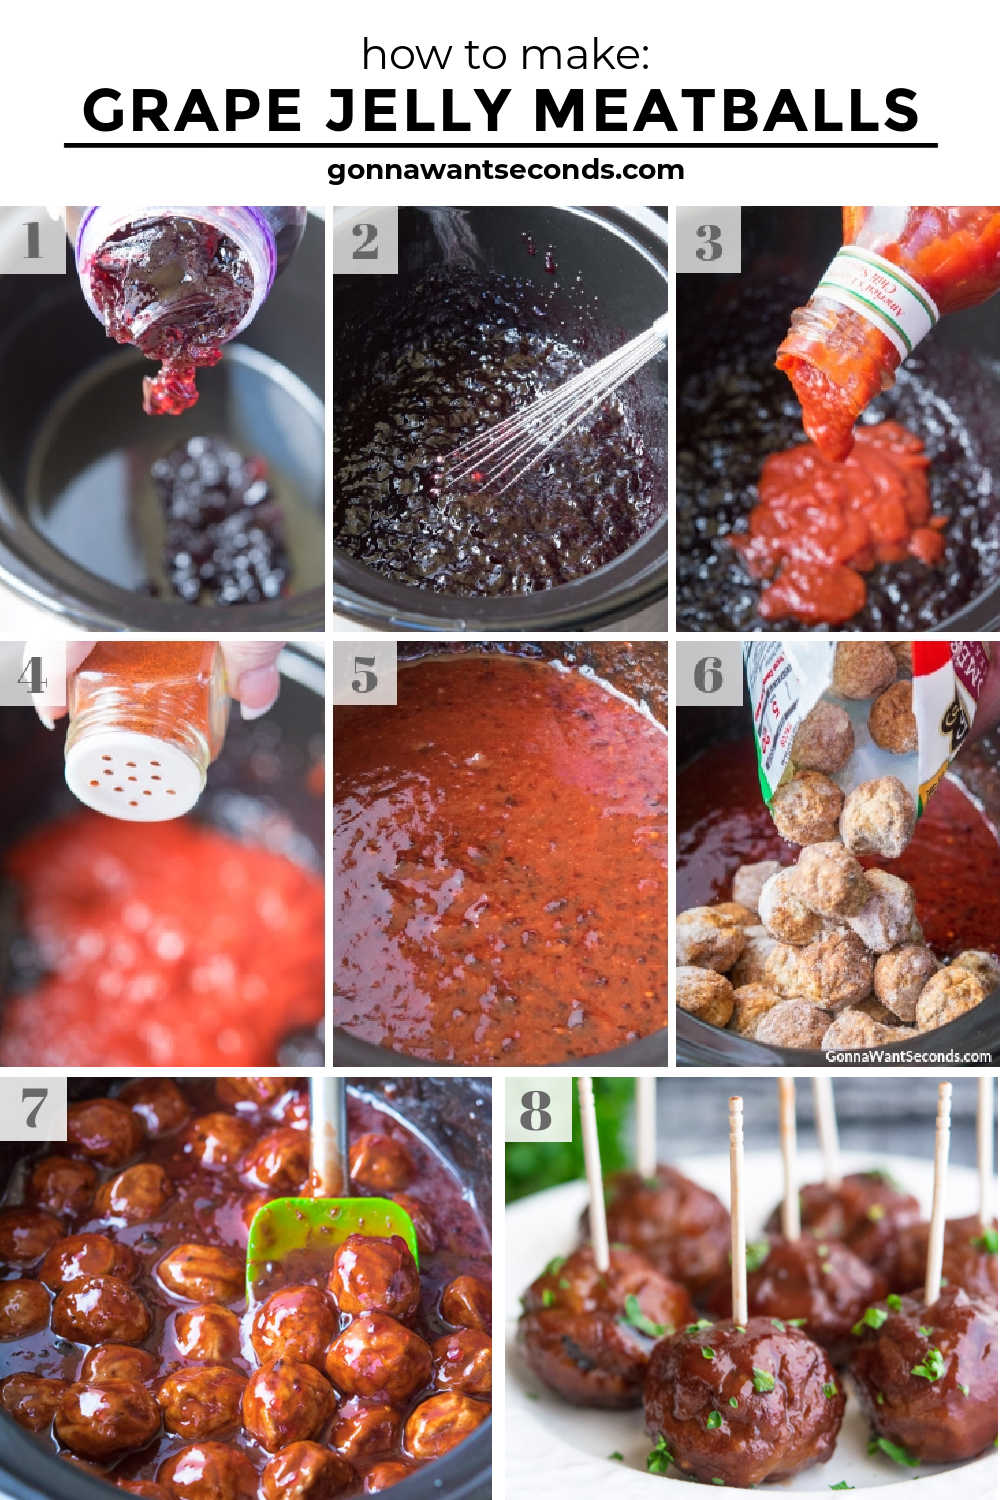 step by step how to make grape jelly meatballs